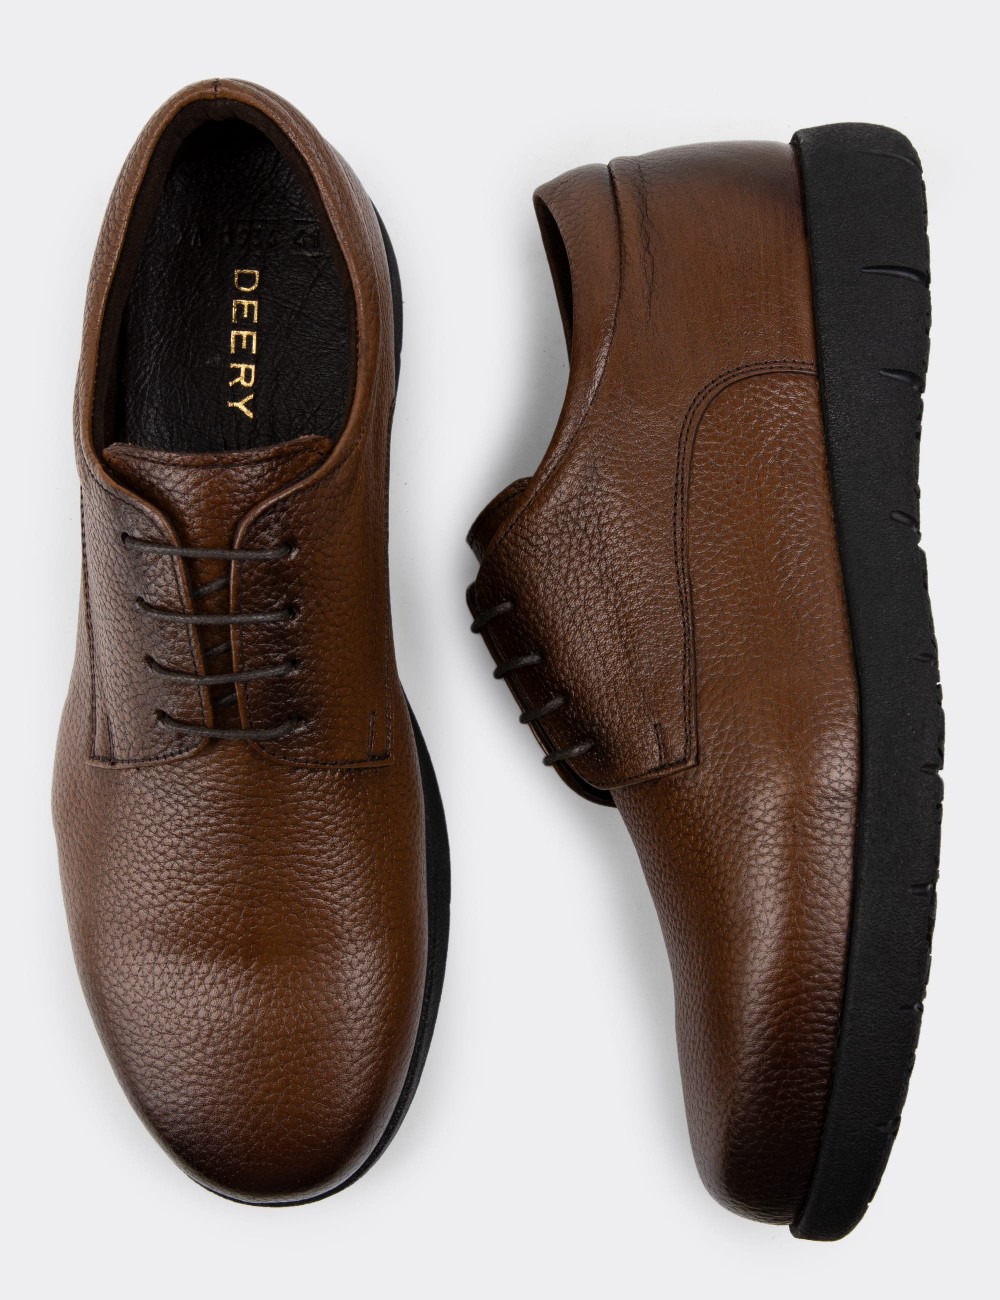 Brown Leather Lace-up Shoes - 01934MKHVC02